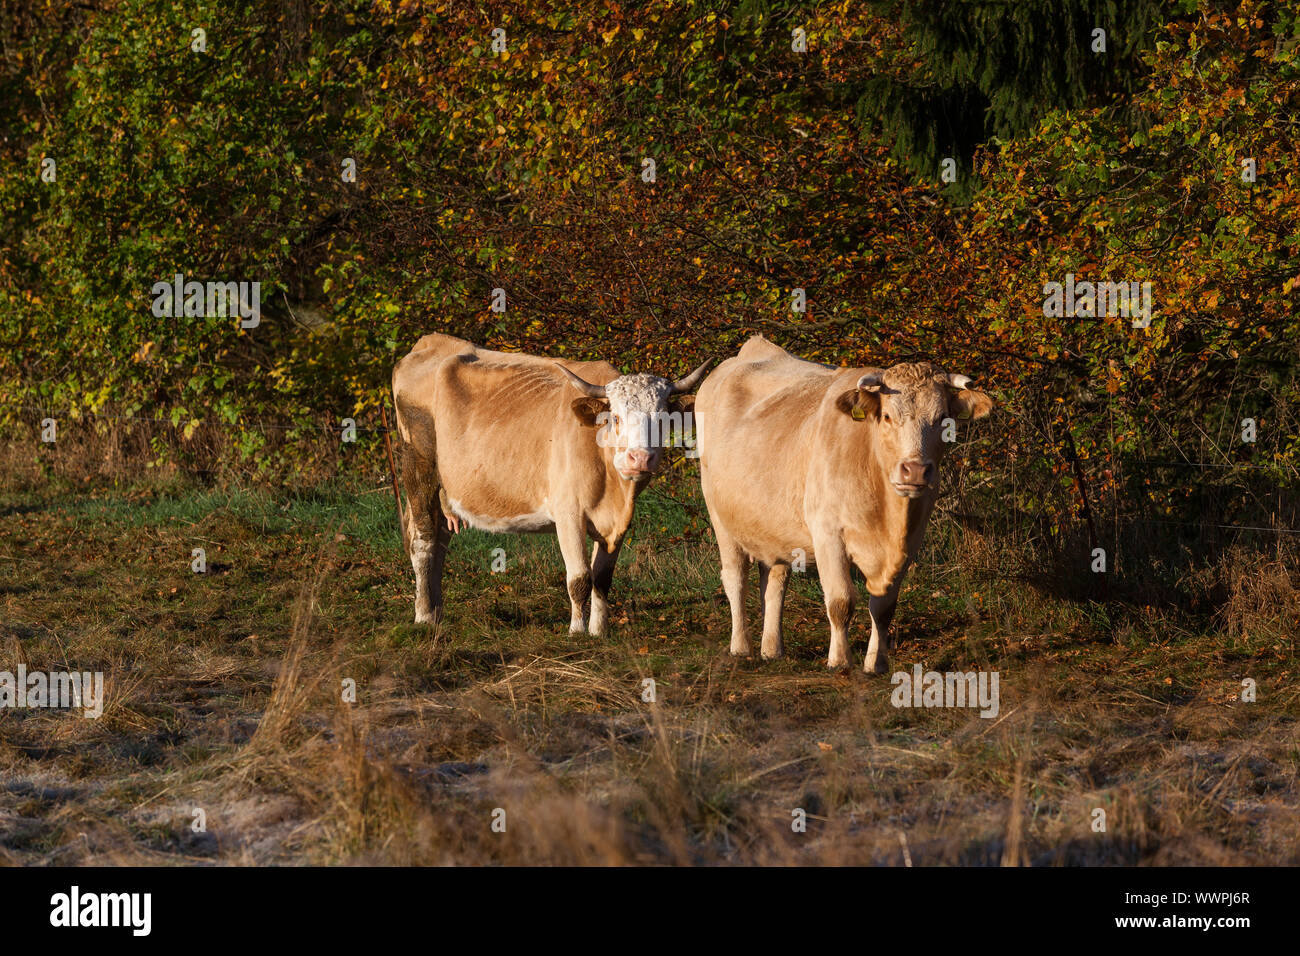 Agriculture Animal husbandry Open land Cow herd Stock Photo